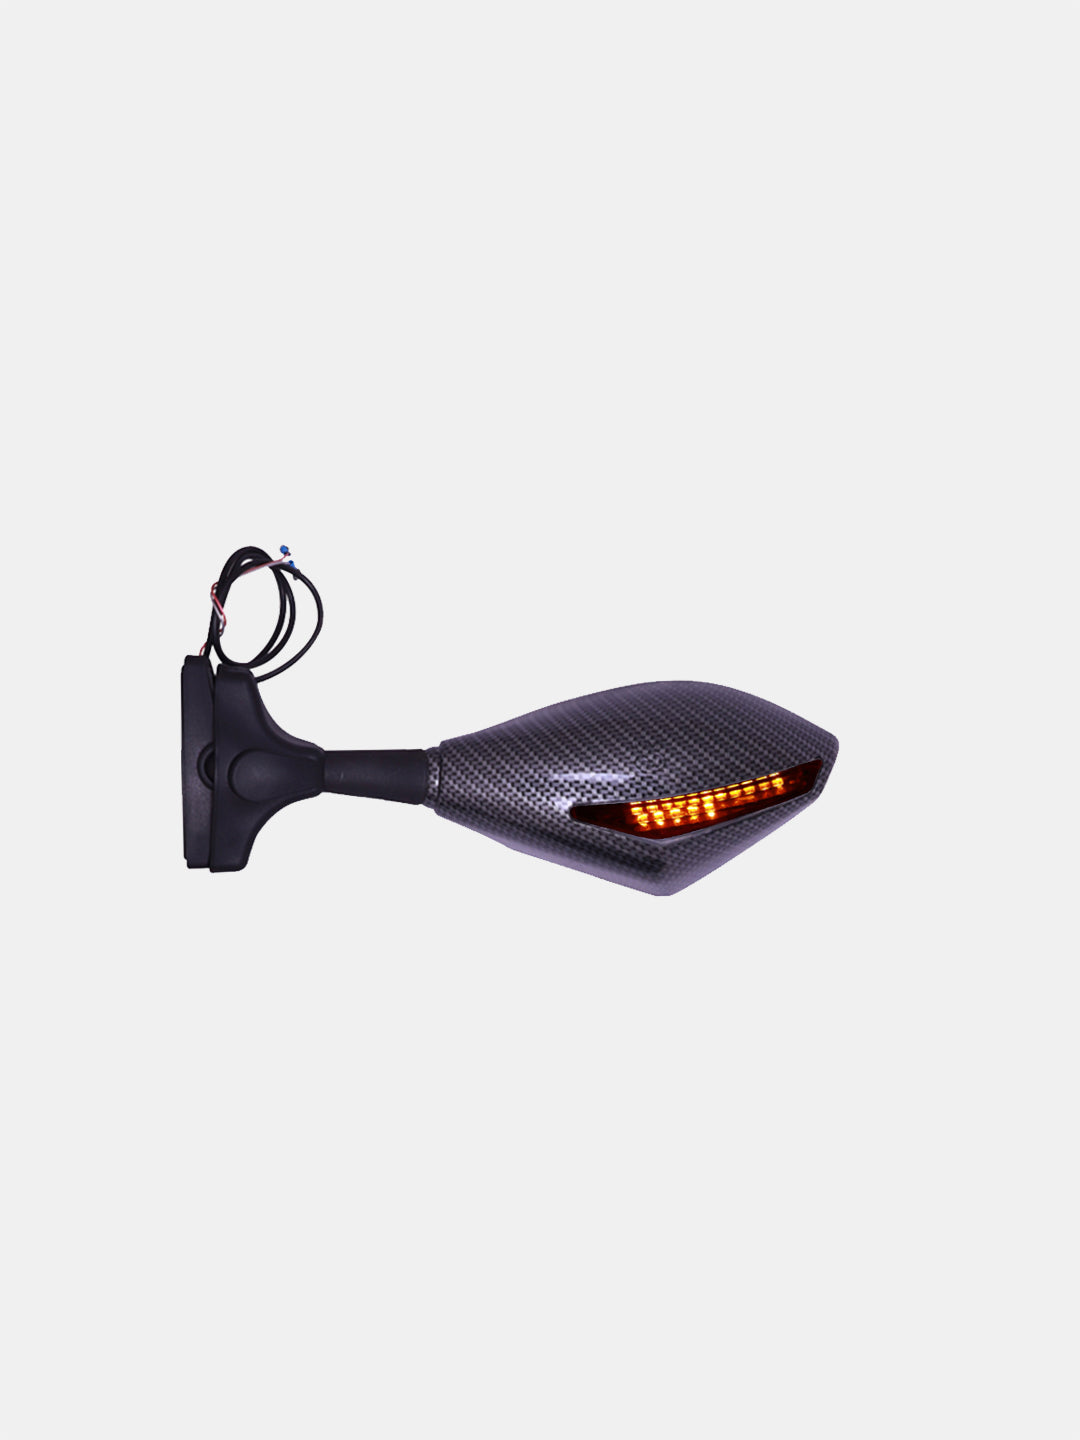 Indicator Mirror-Carbon Two Side